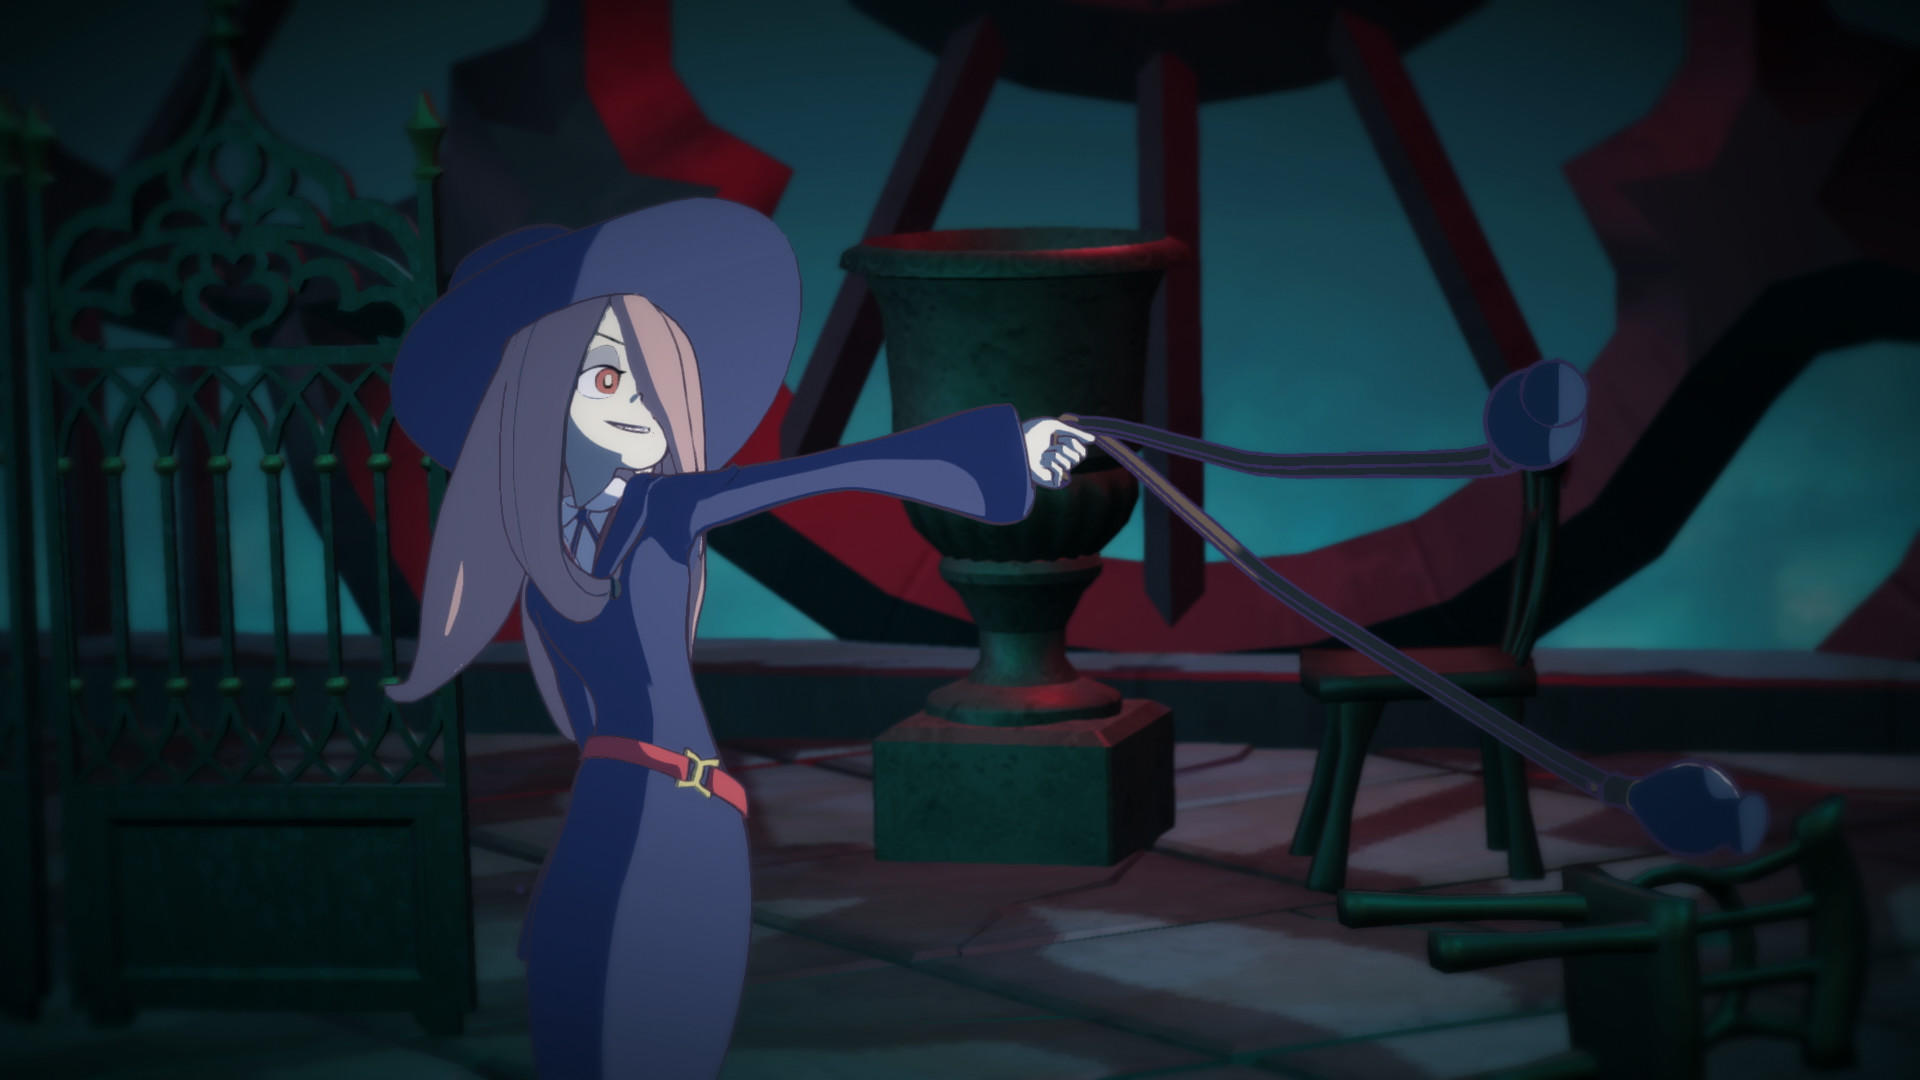 Little Witch Academia: Chamber of Time 게임 스크린 샷